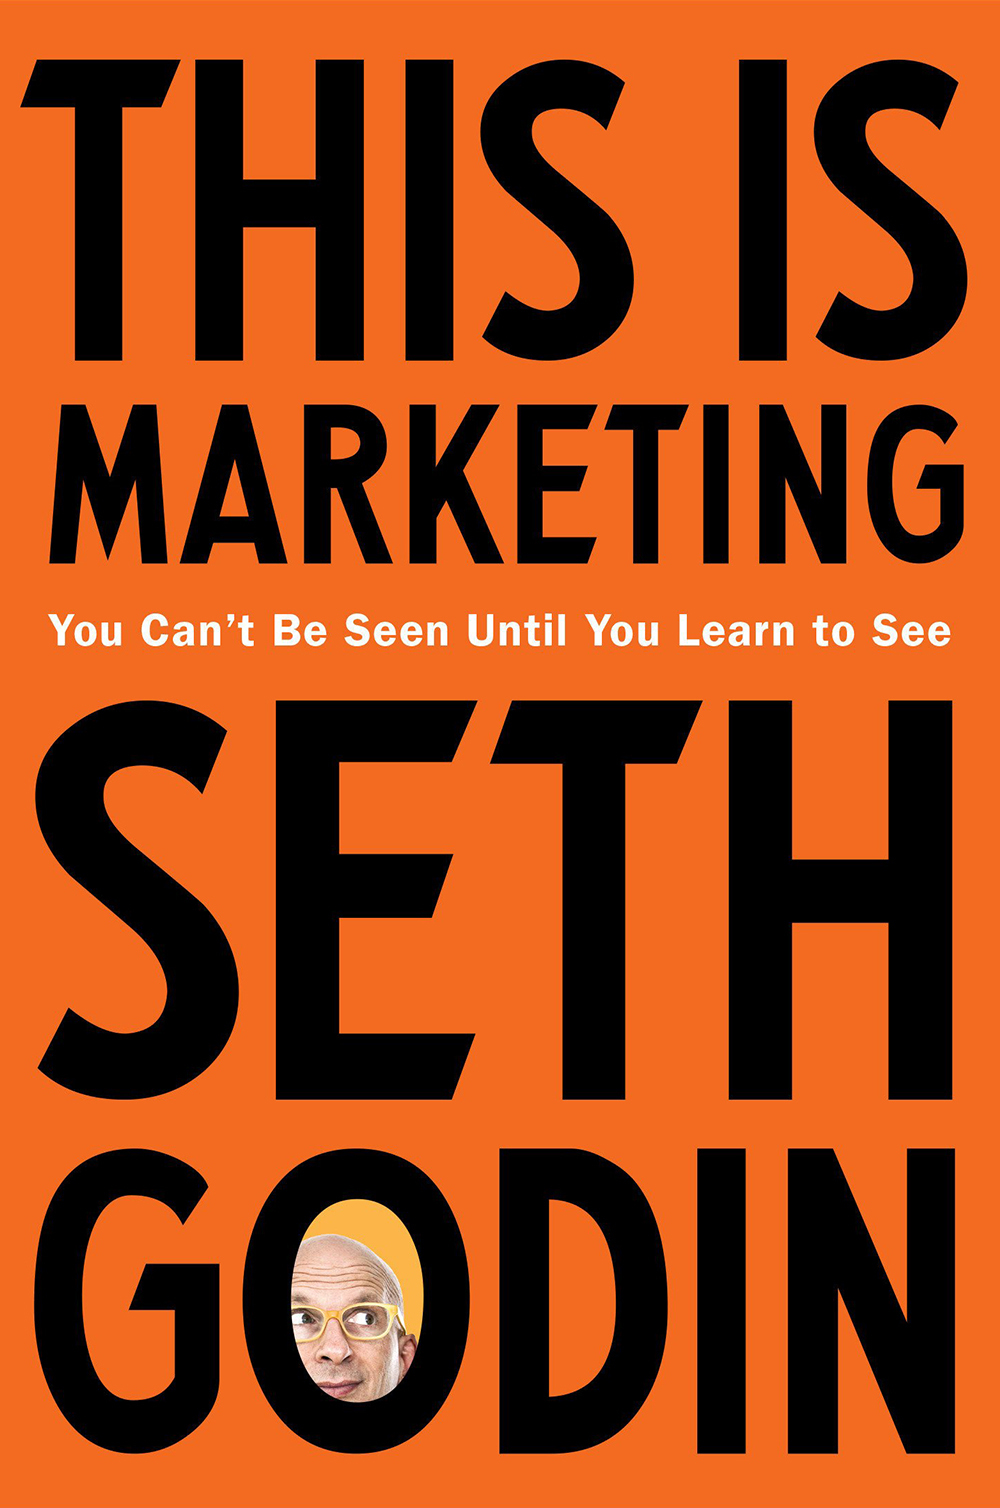 “This Is Marketing” by Seth Godin